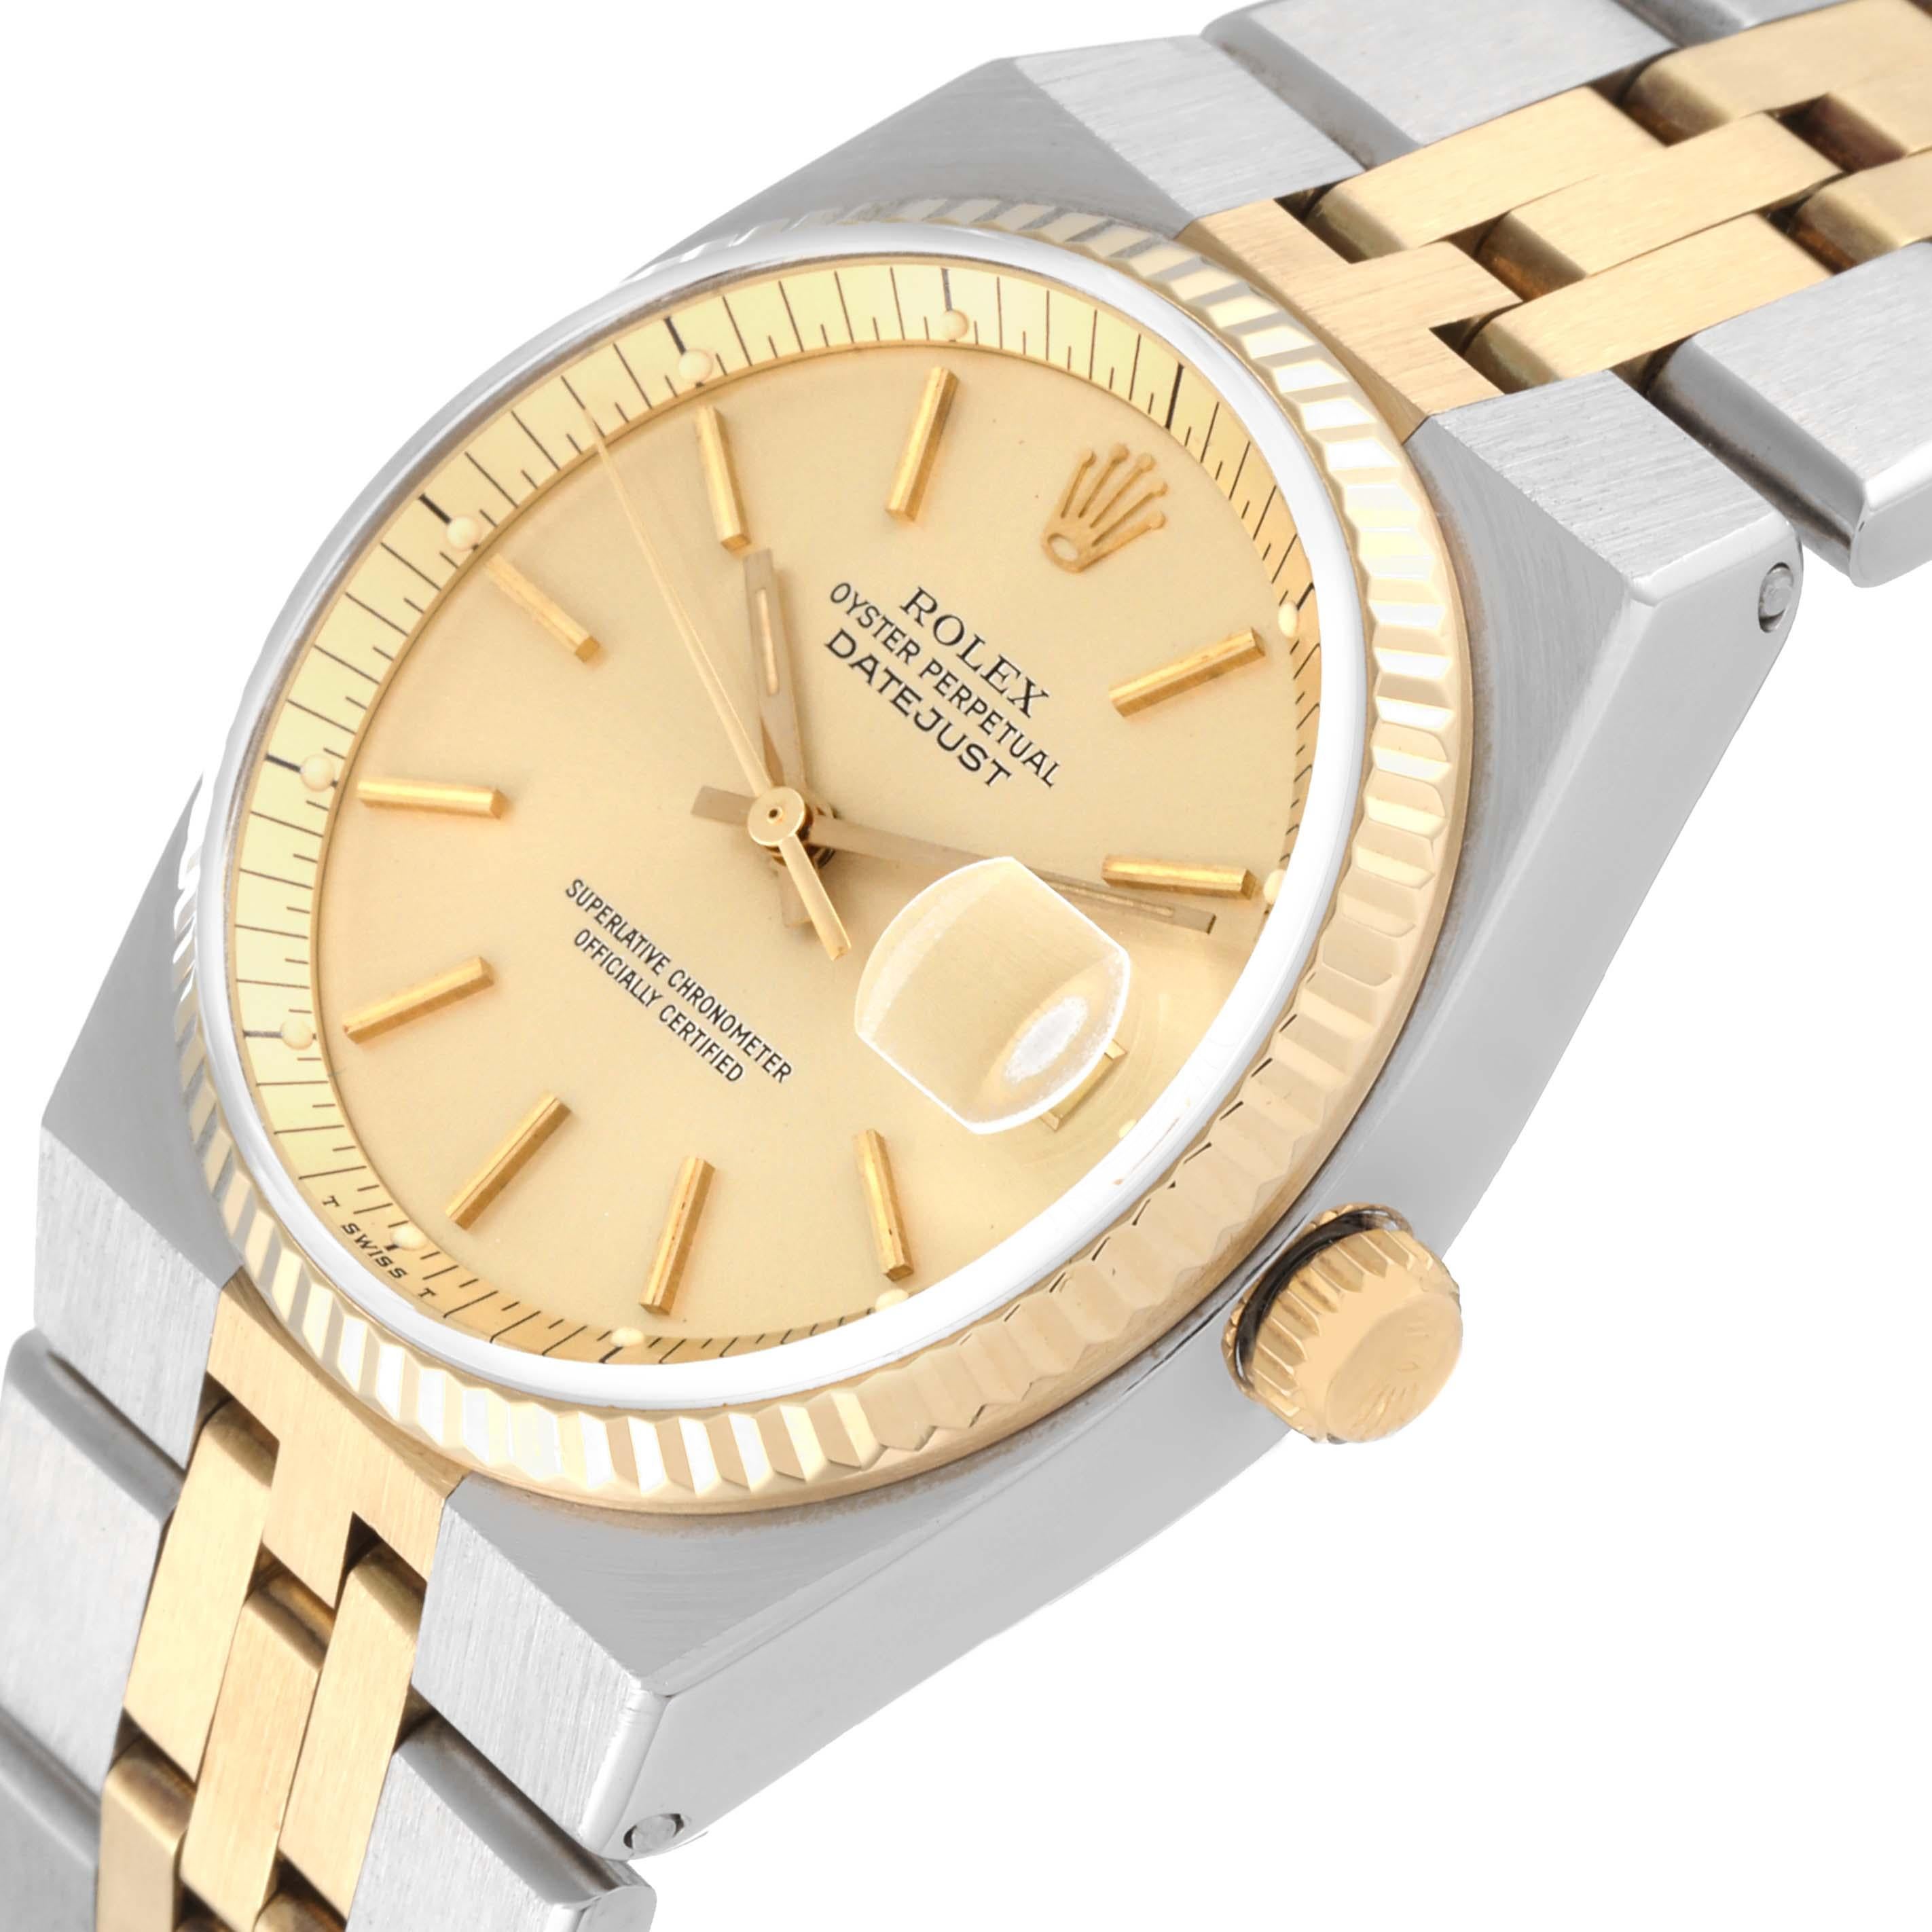 Rolex Datejust 36 Steel Yellow Gold Vintage Mens Watch 1630 For Sale 5